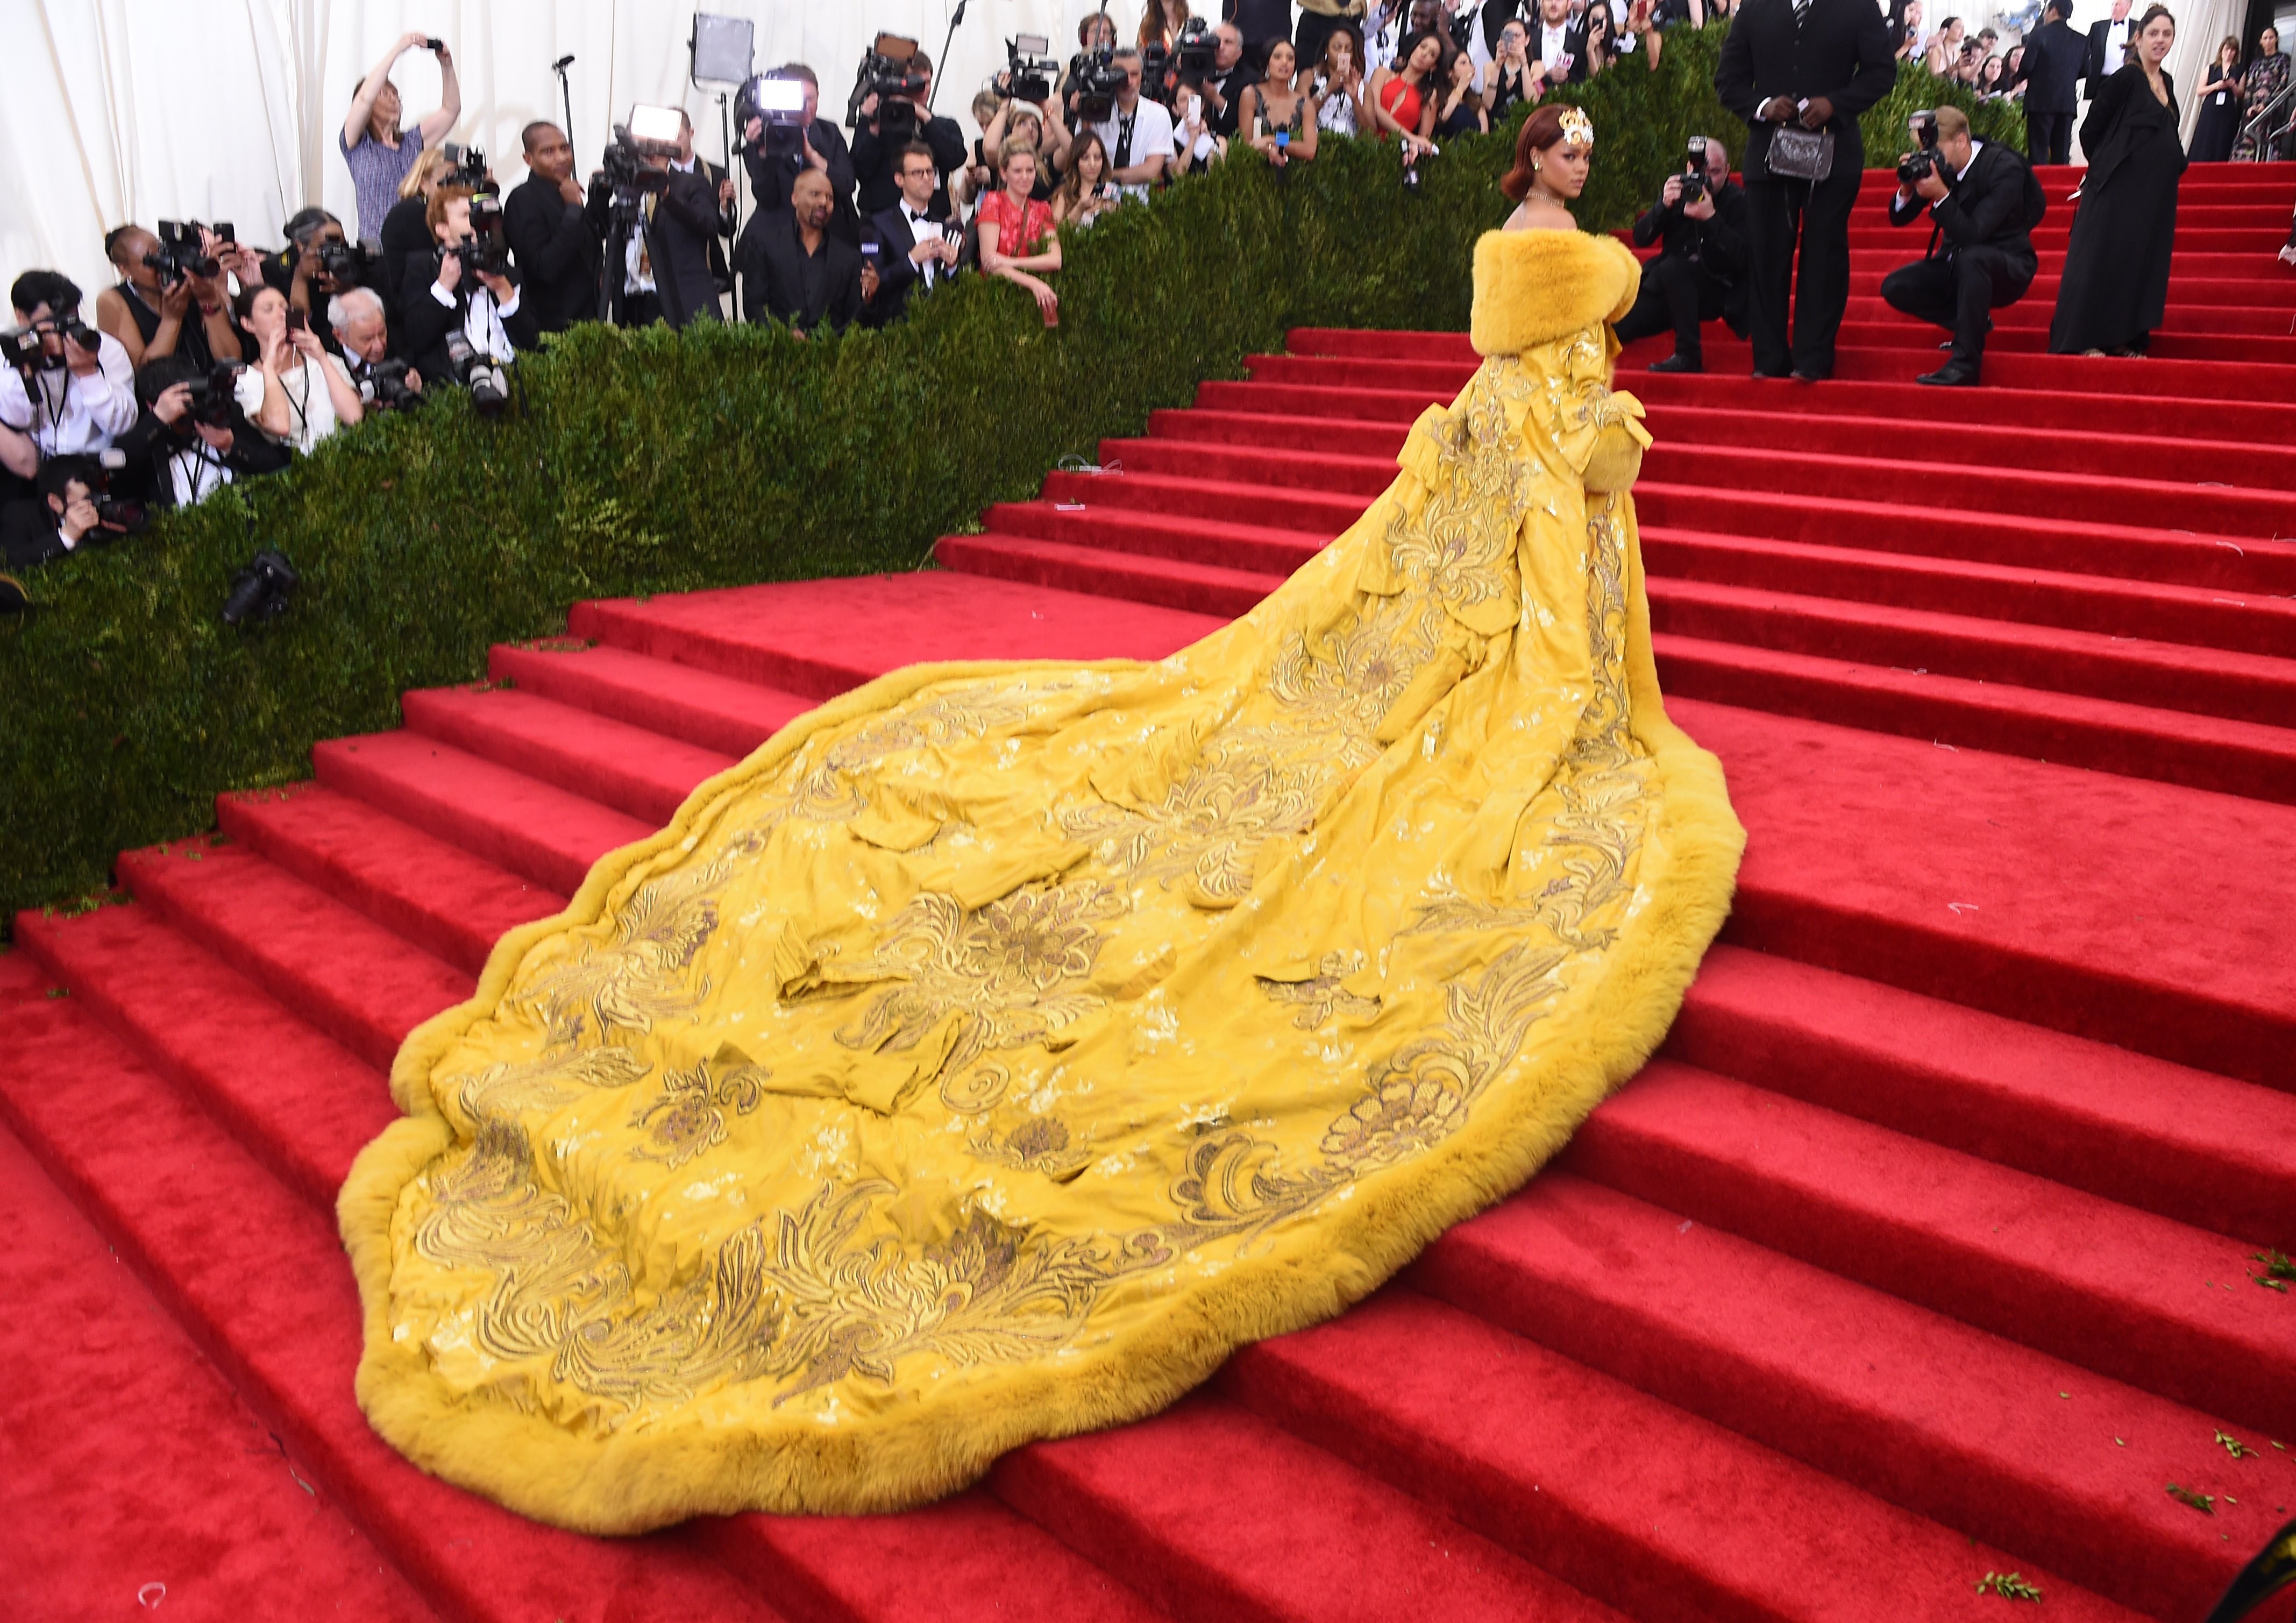 Spinning gold: Chinese couturier Guo Pei takes Paris - CNN Style